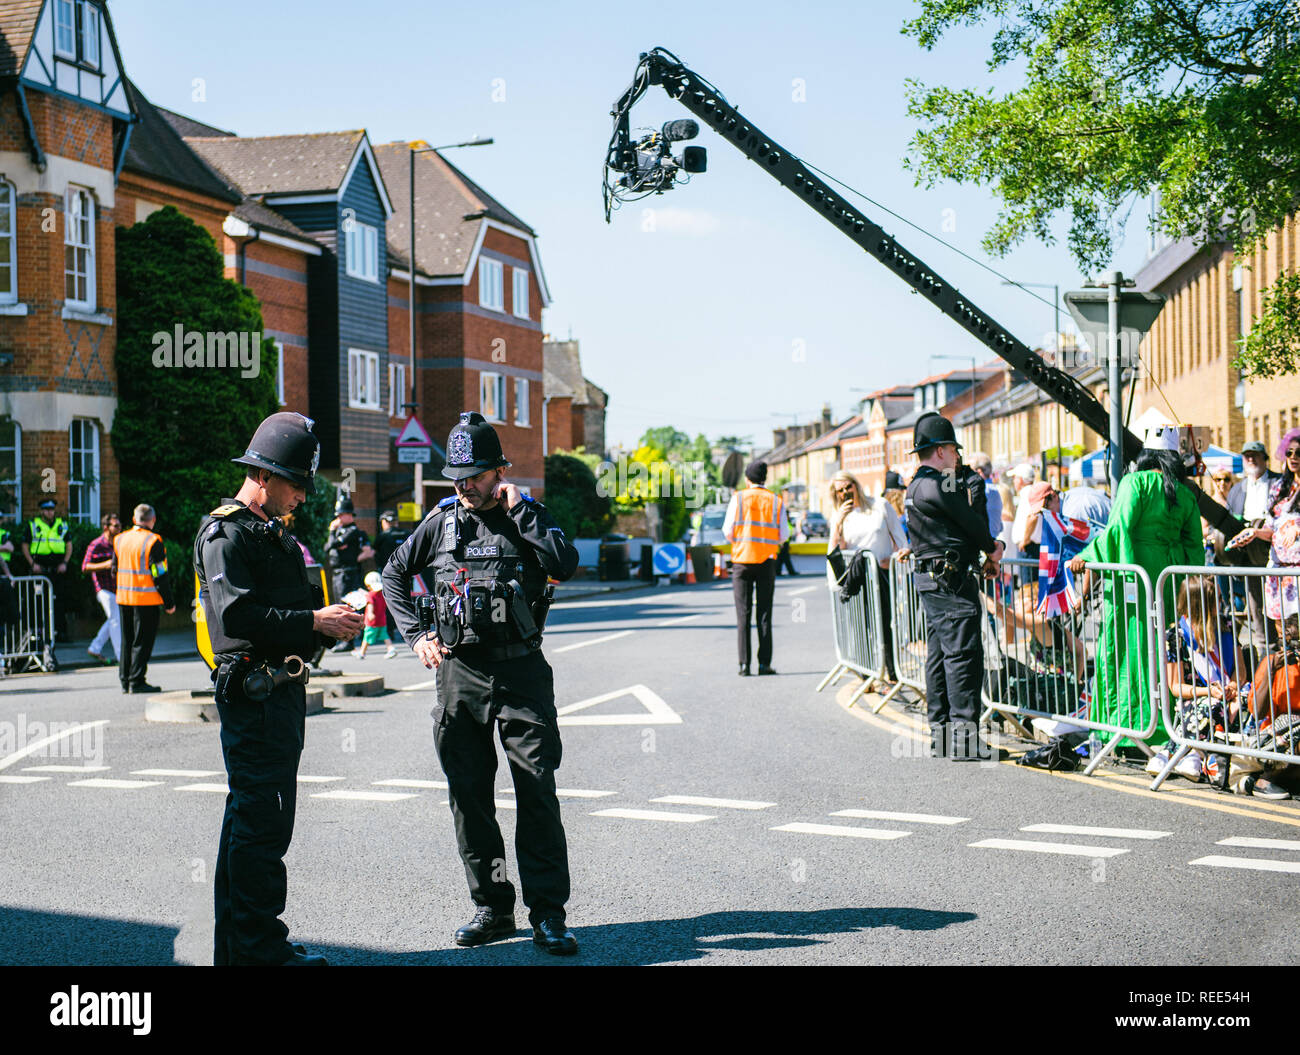 WINDSOR, UNITED KINGDOM - MAY 19, 2018: Broadcast TV camera, Constables police officers surveilling royal wedding marriage celebration of Prince Harry and Meghan Markle Stock Photo